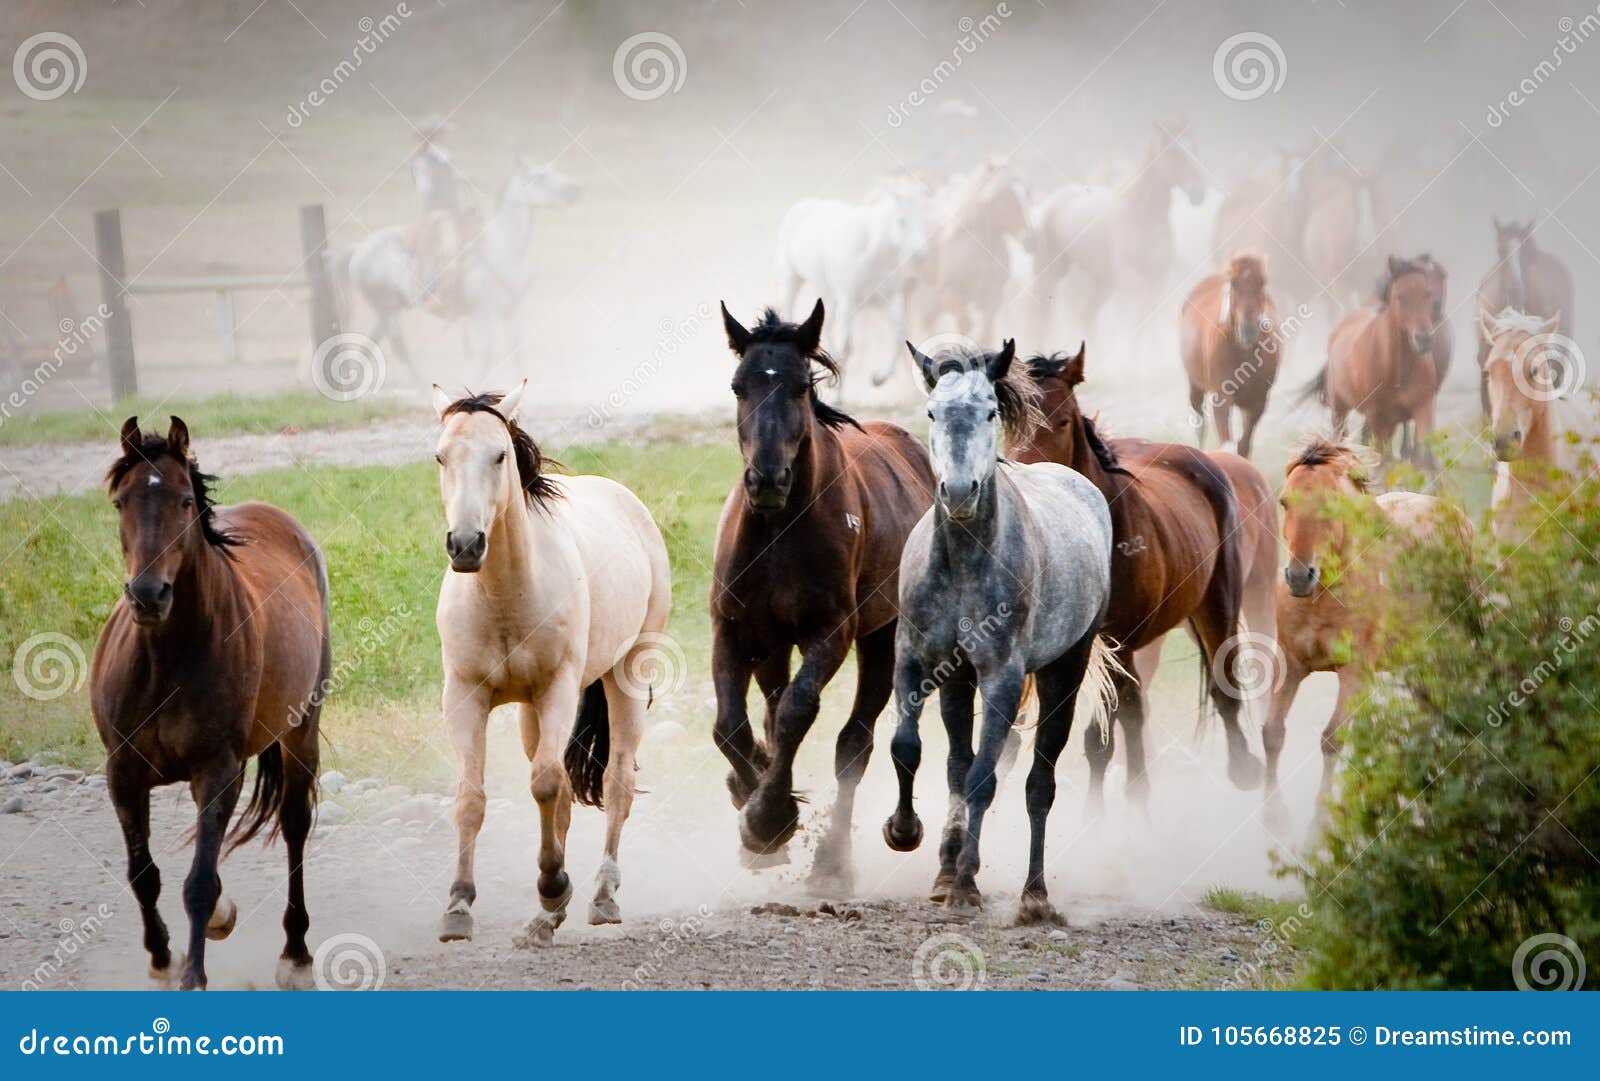 stampede of multi-colored horses